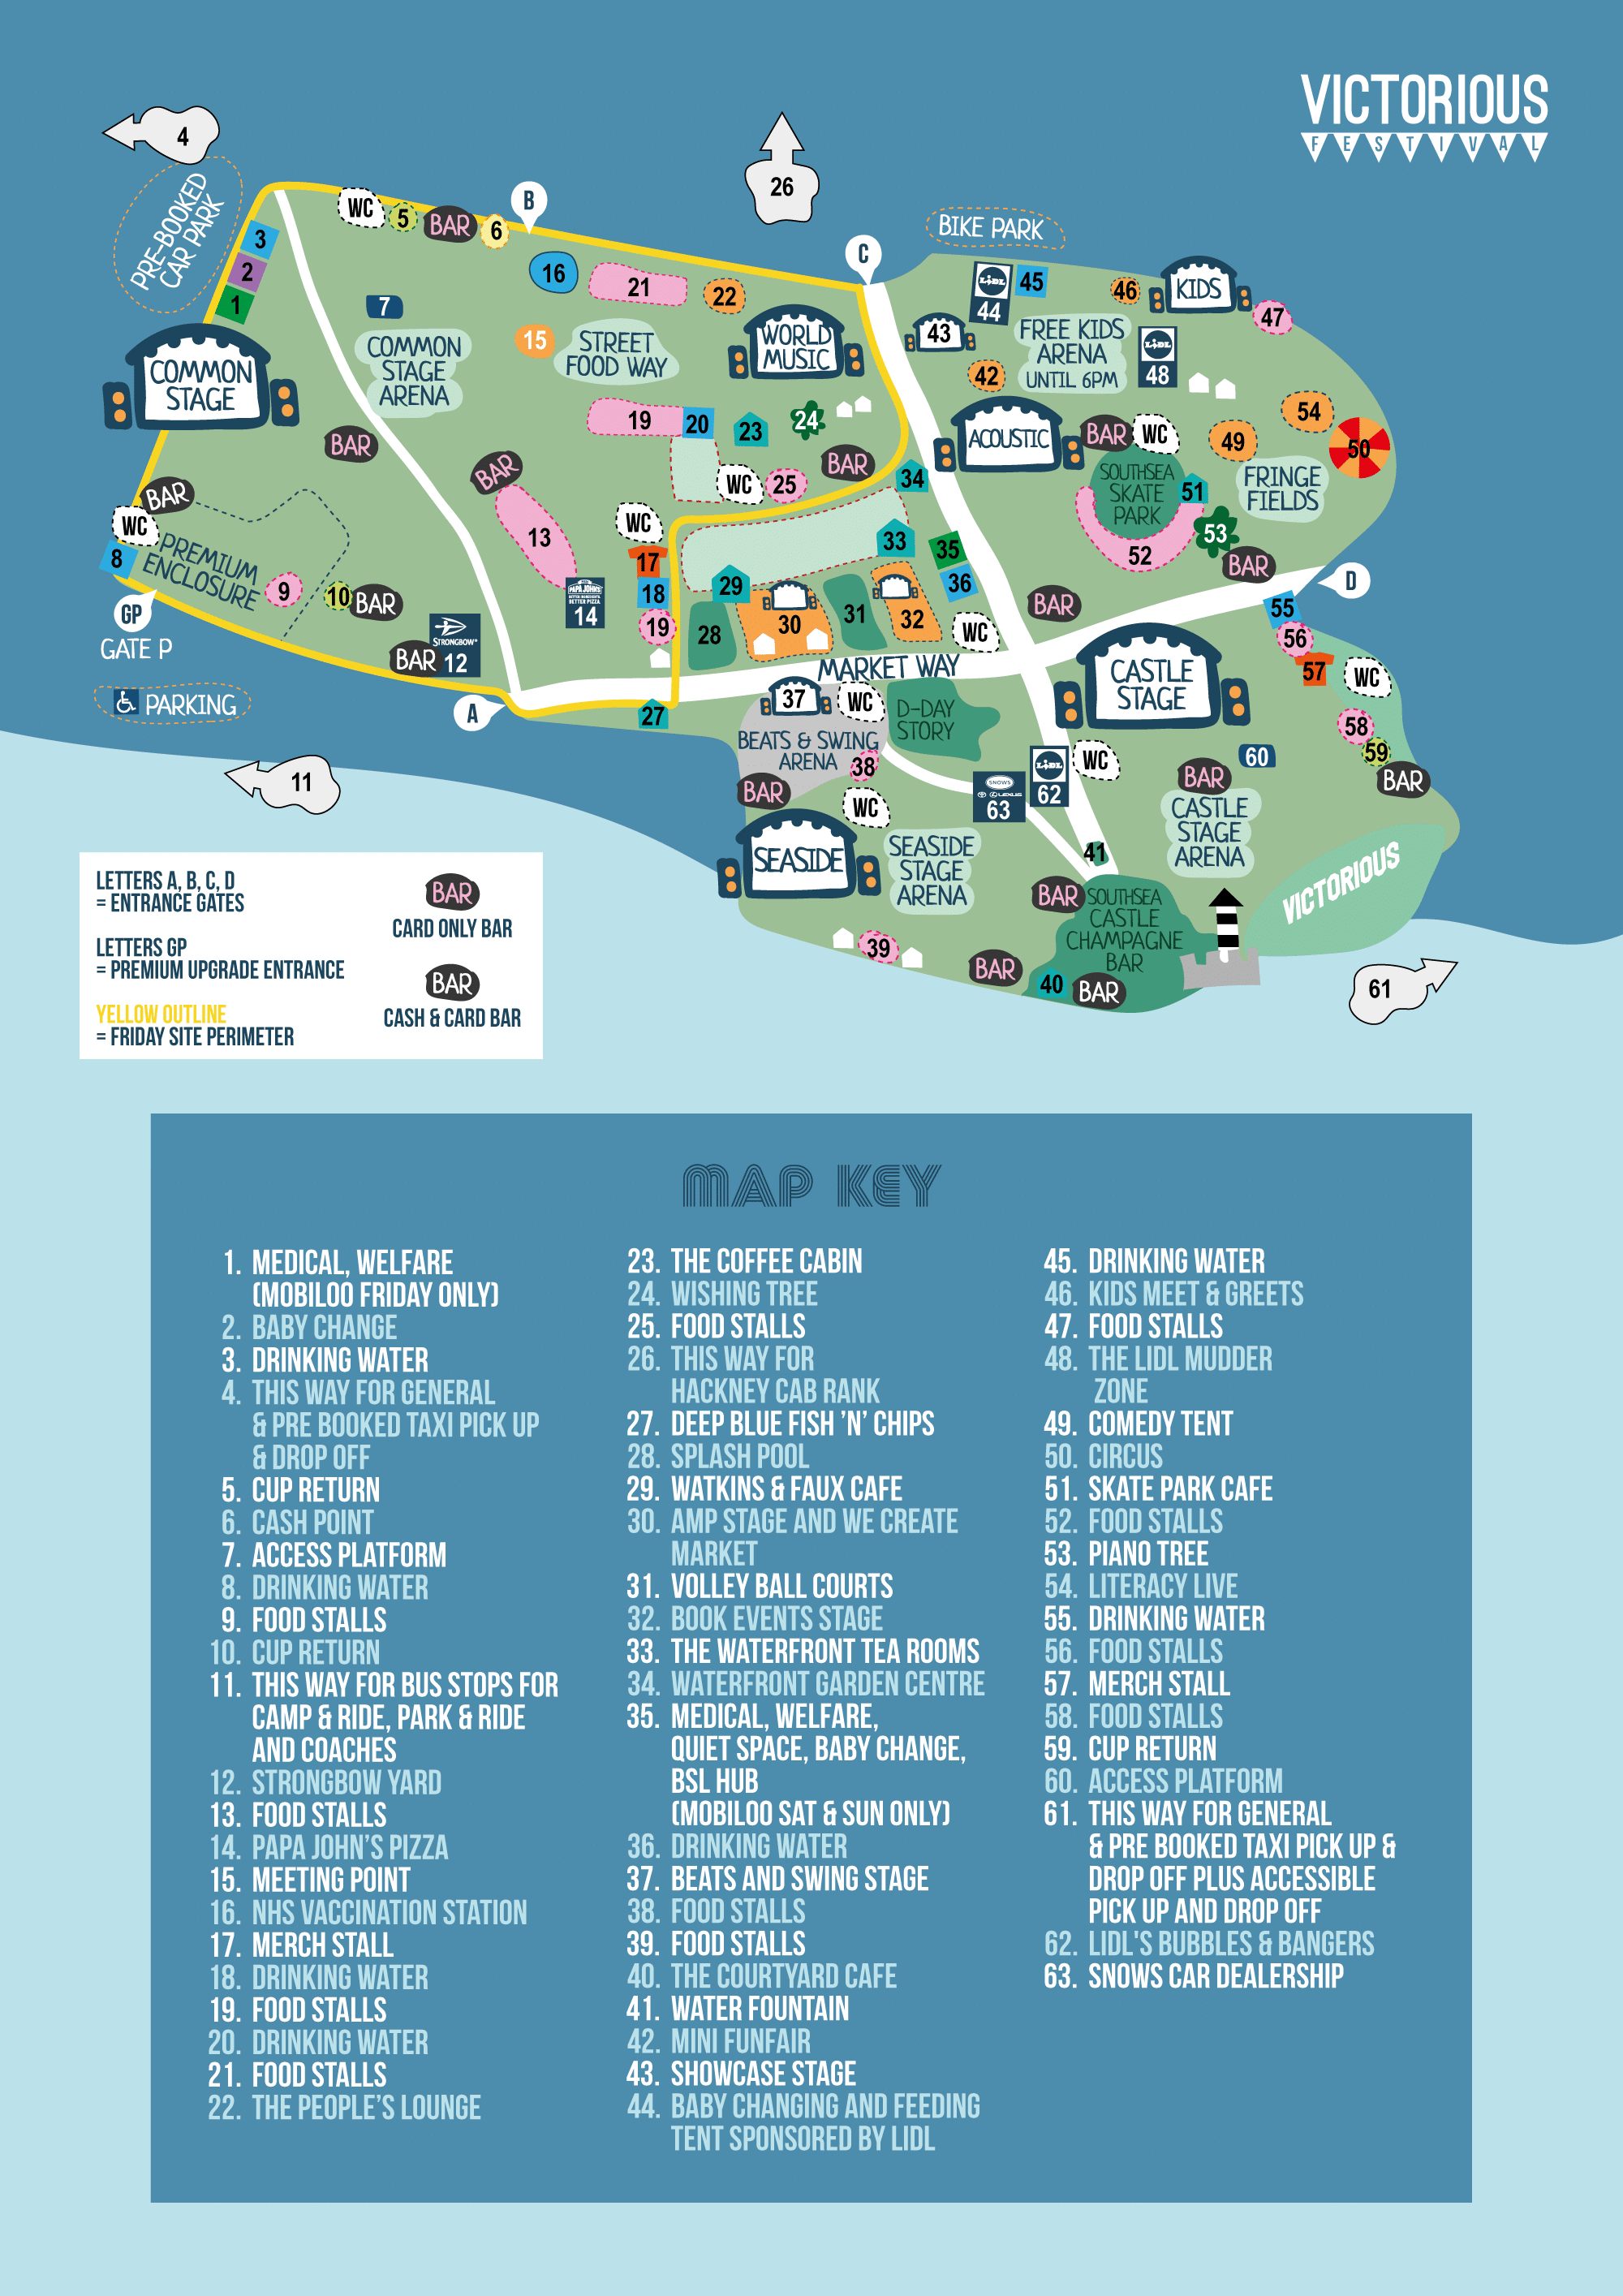 a map illustrating various stages, bars, toilets and other facilities that are at Victorious 2021. It is a cartoon style illustration.